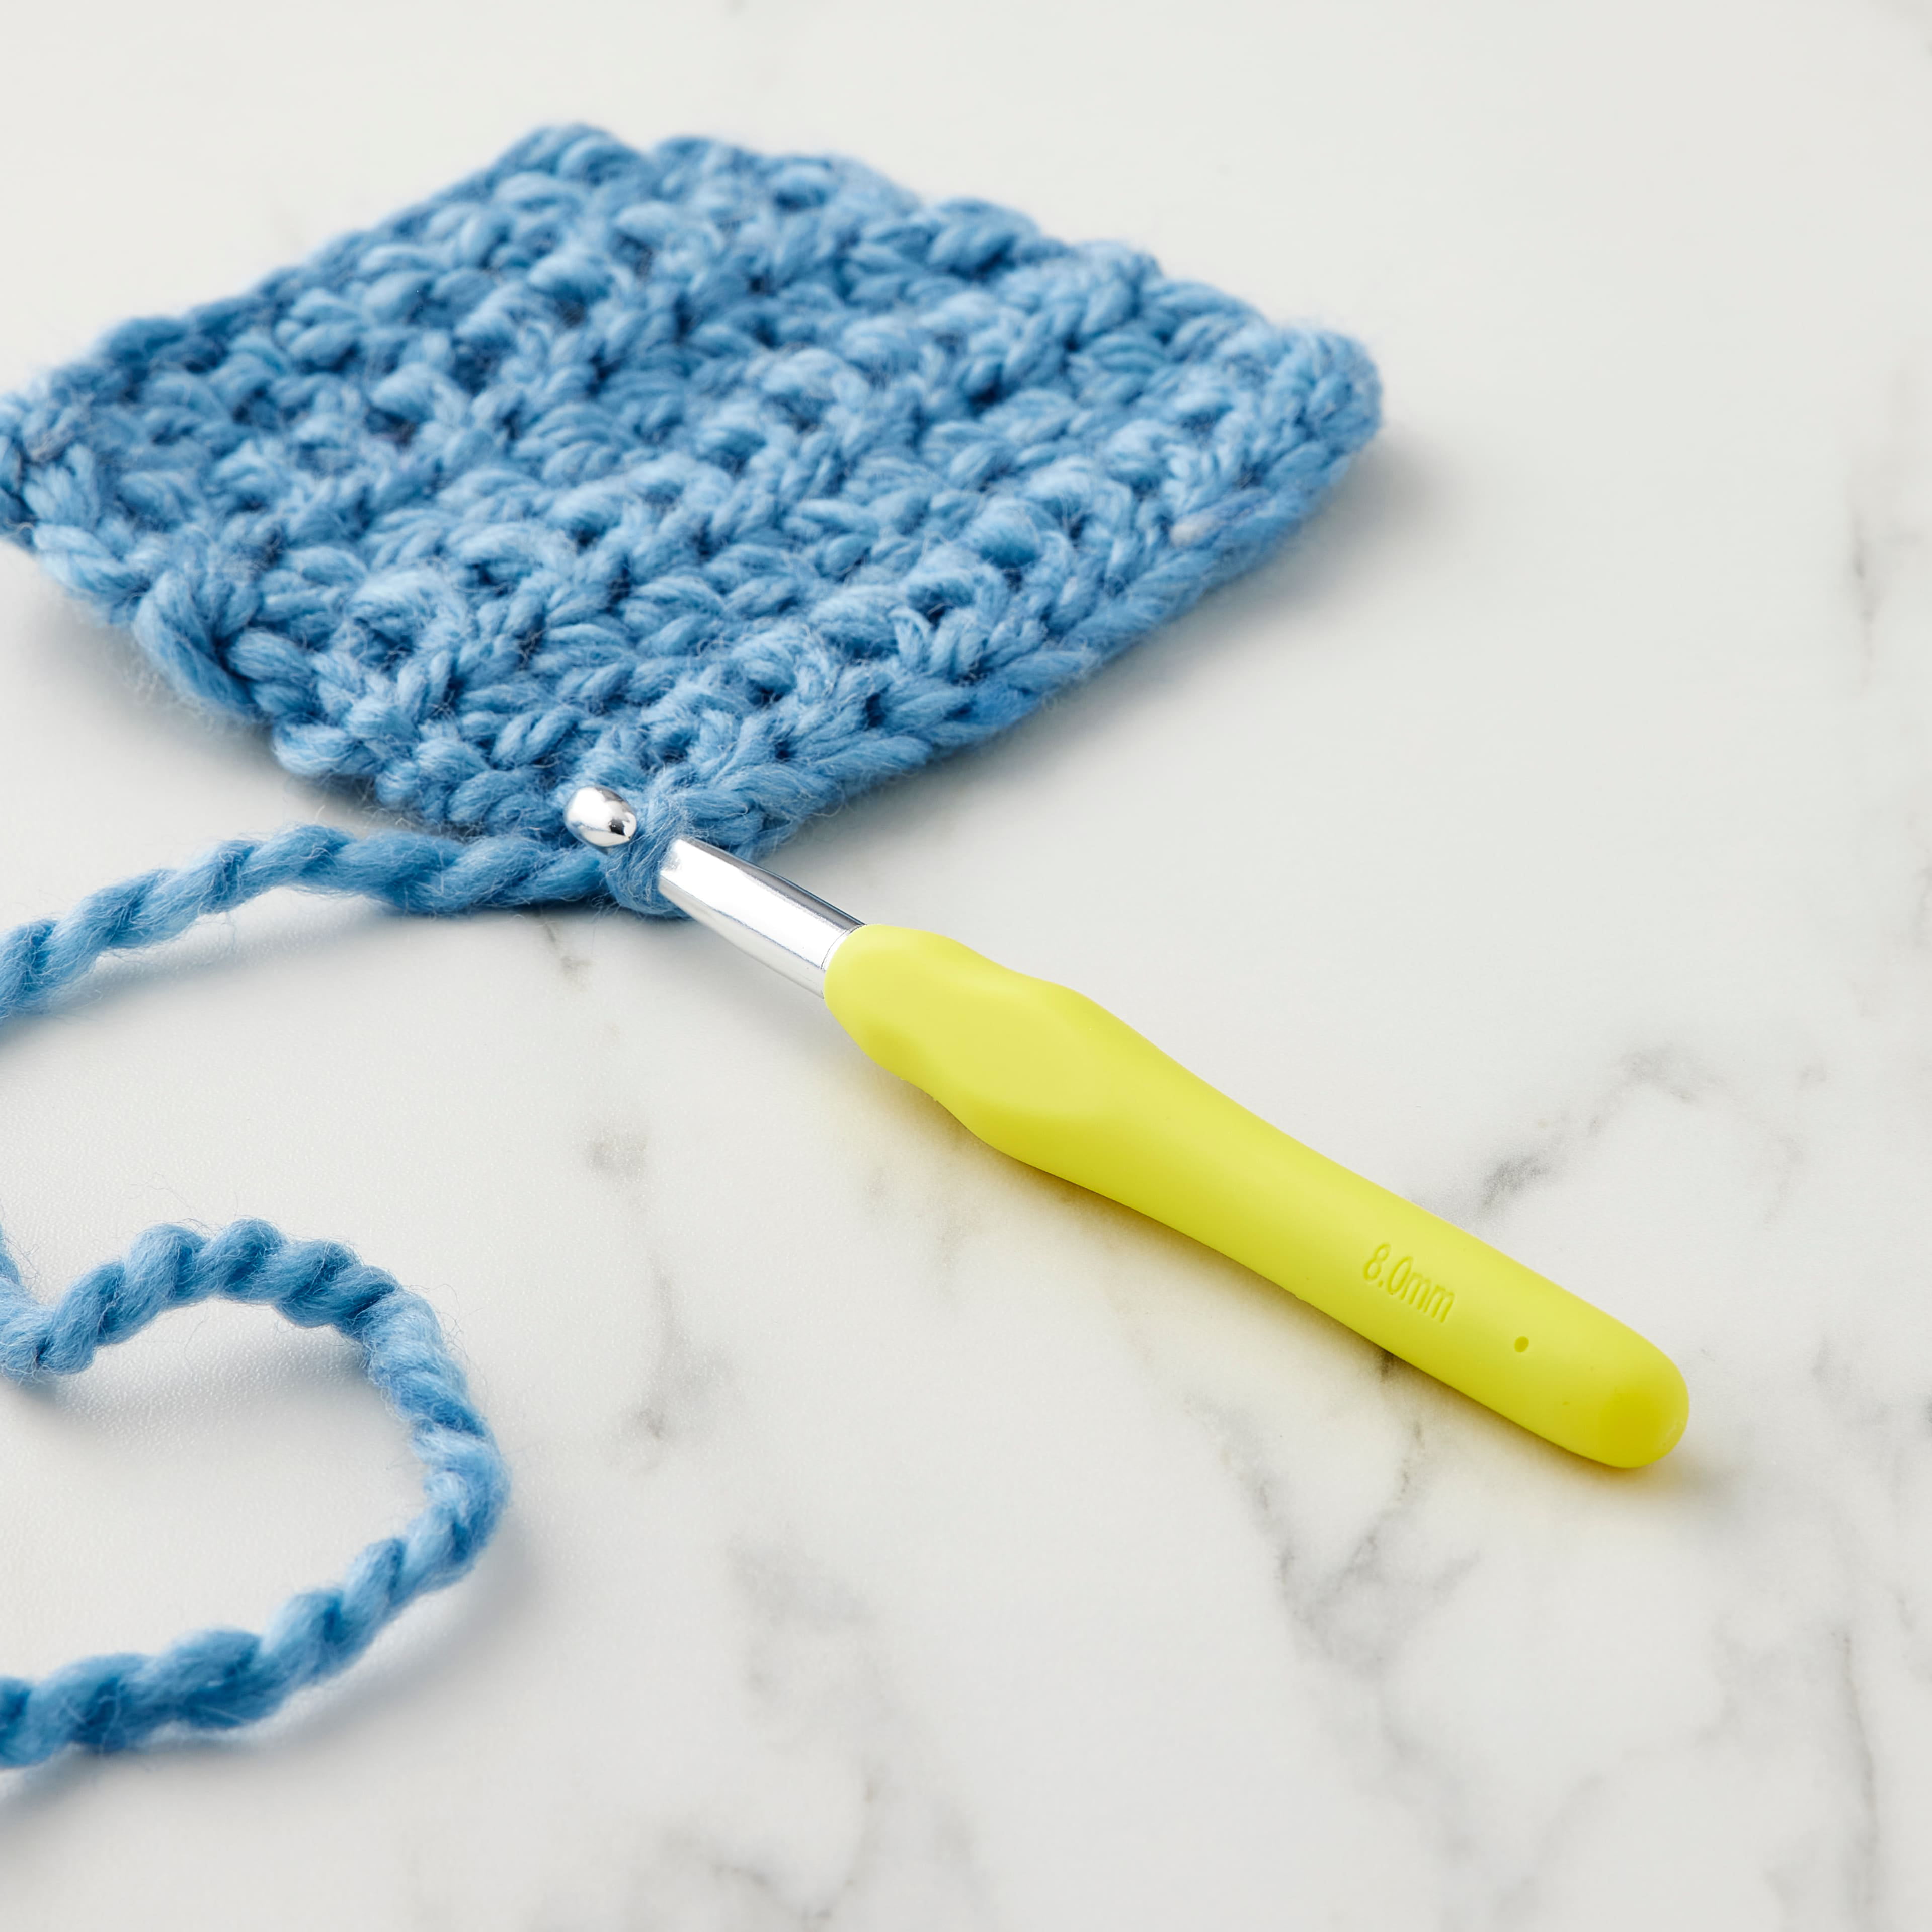 Aluminum Crochet Hook Set with Scissors by Loops & Threads®